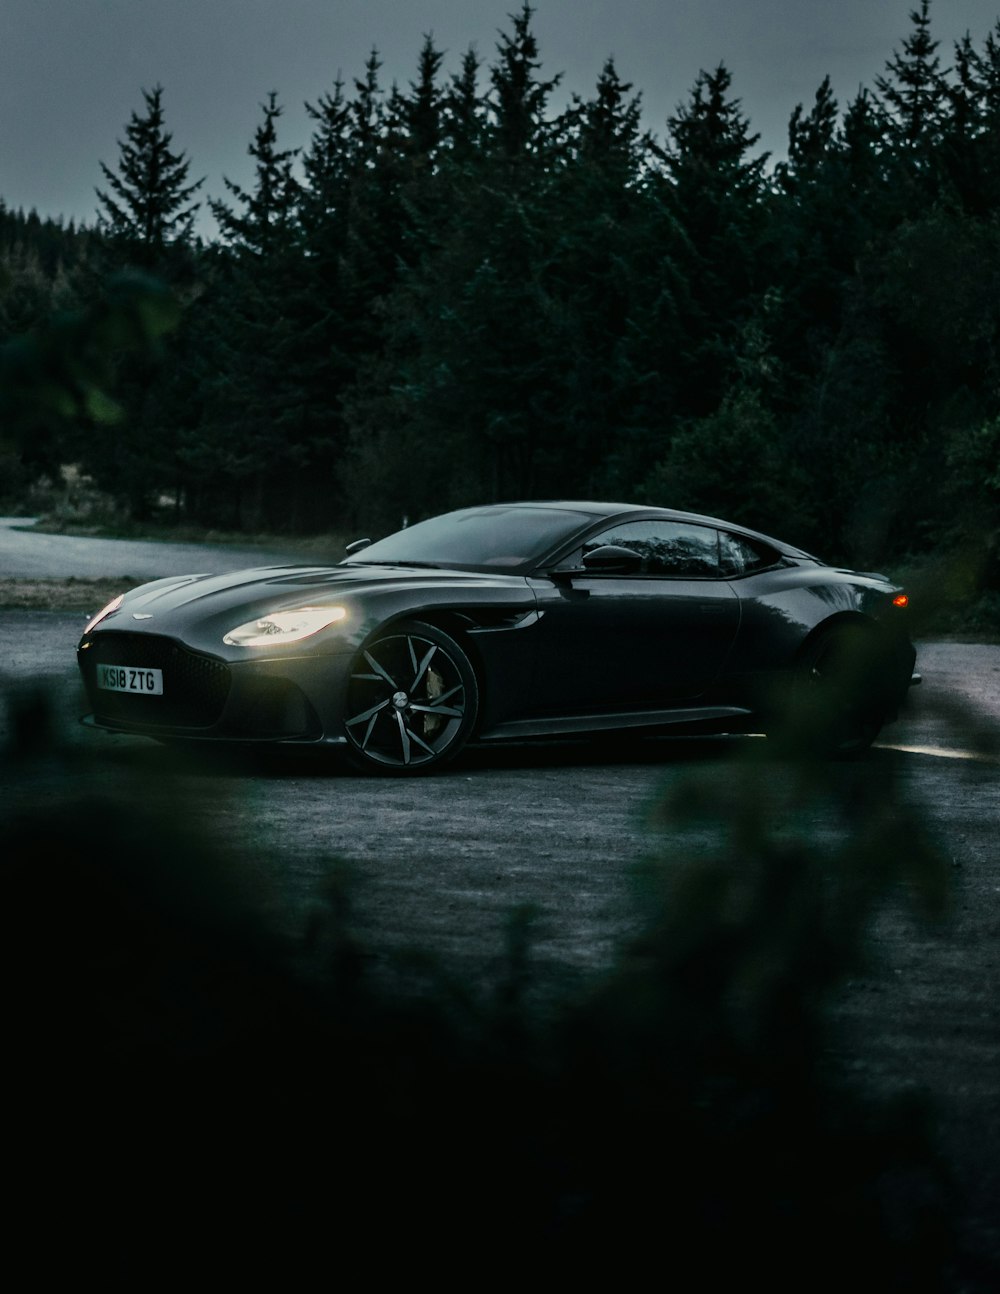 Aston Martin Pictures Download Free Images On Unsplash